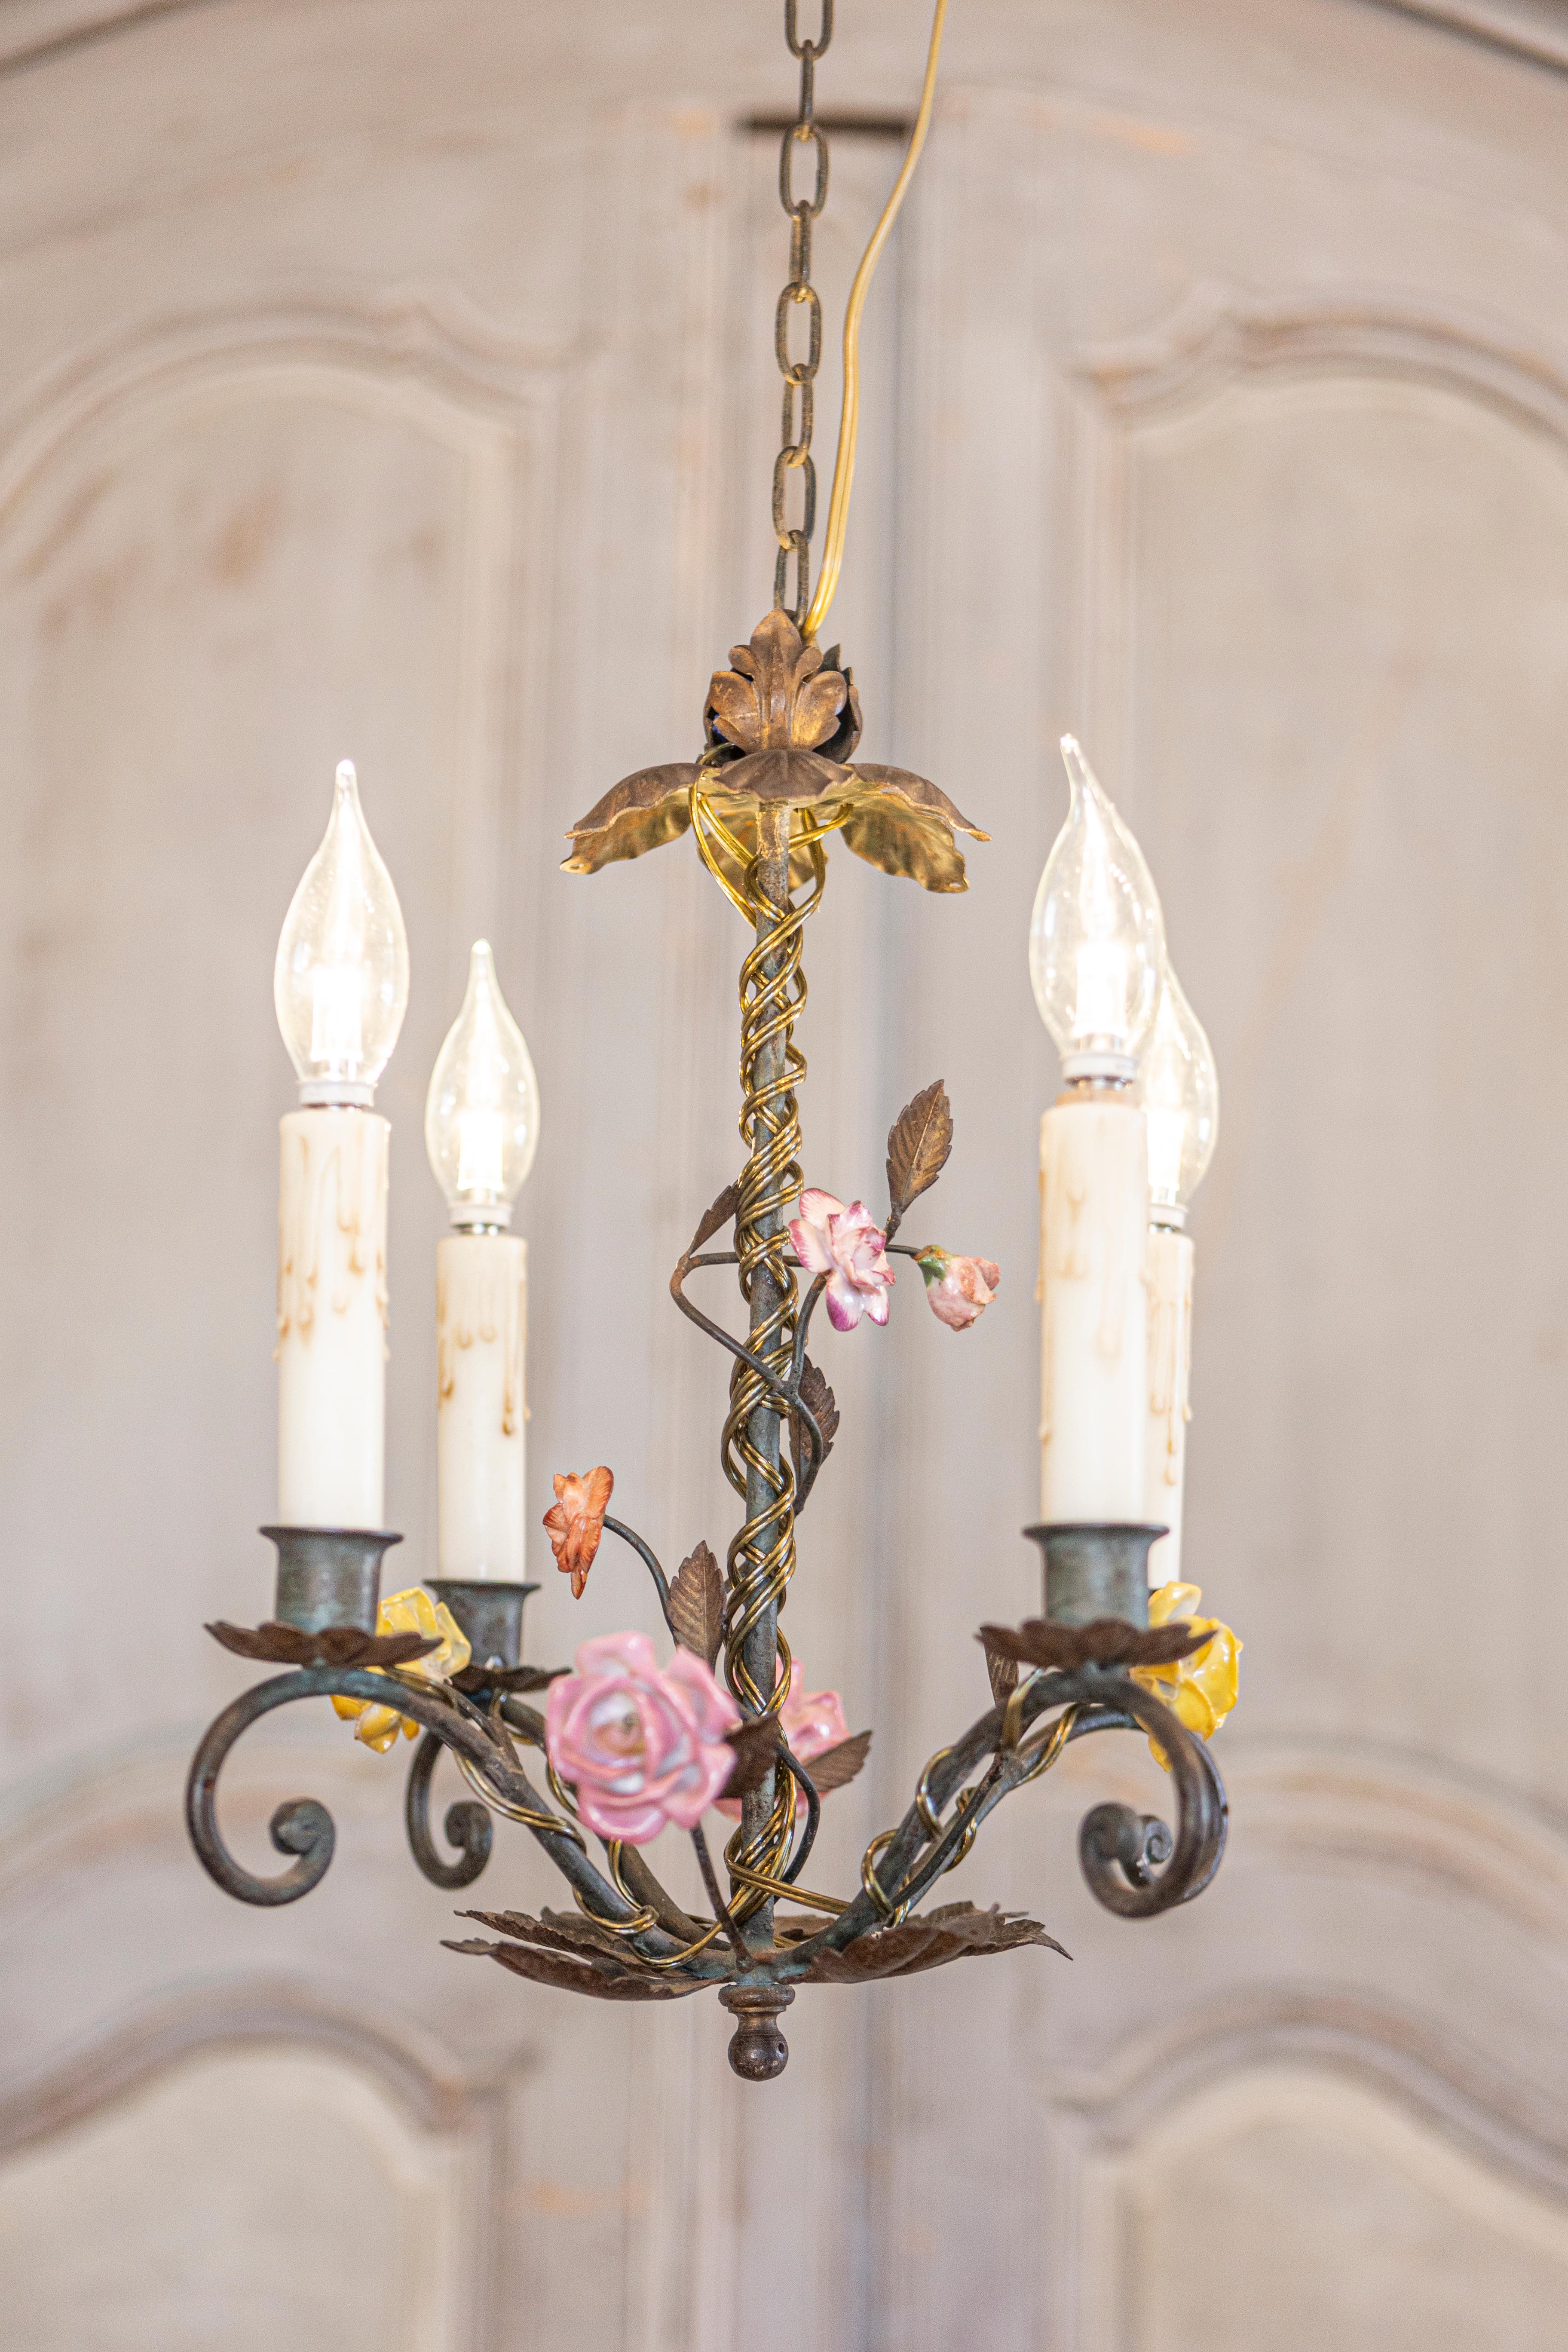 A French iron or tôle four-light chandelier from the 20th century with hand-painted porcelain roses, scrolling arms and foliage, professionally rewired for the USA. This enchanting French four-light chandelier from the 20th century blends the rustic